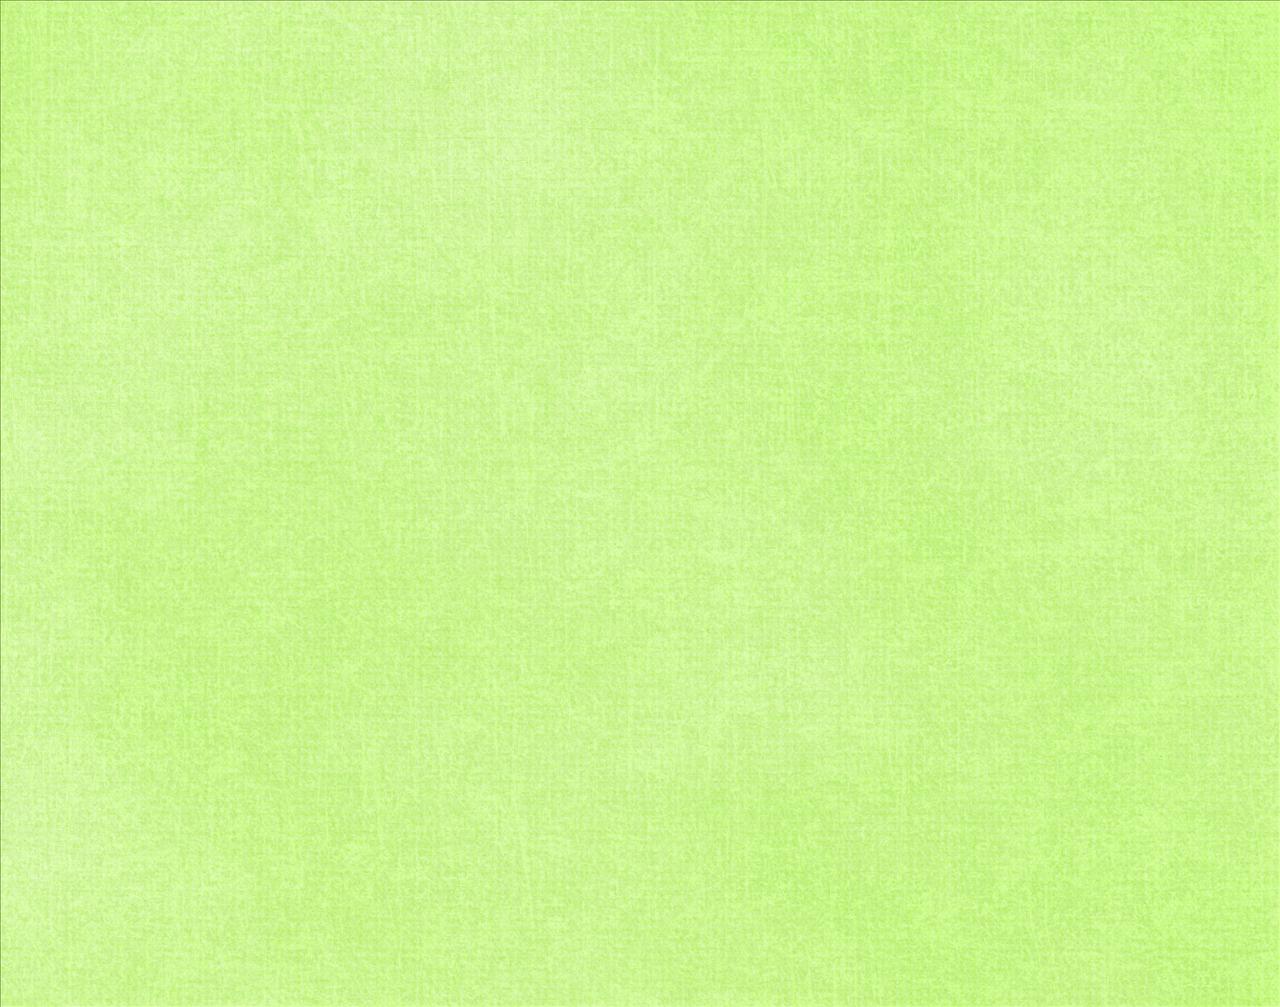 Pale Green Aesthetic Wallpapers - Top Free Pale Green ...